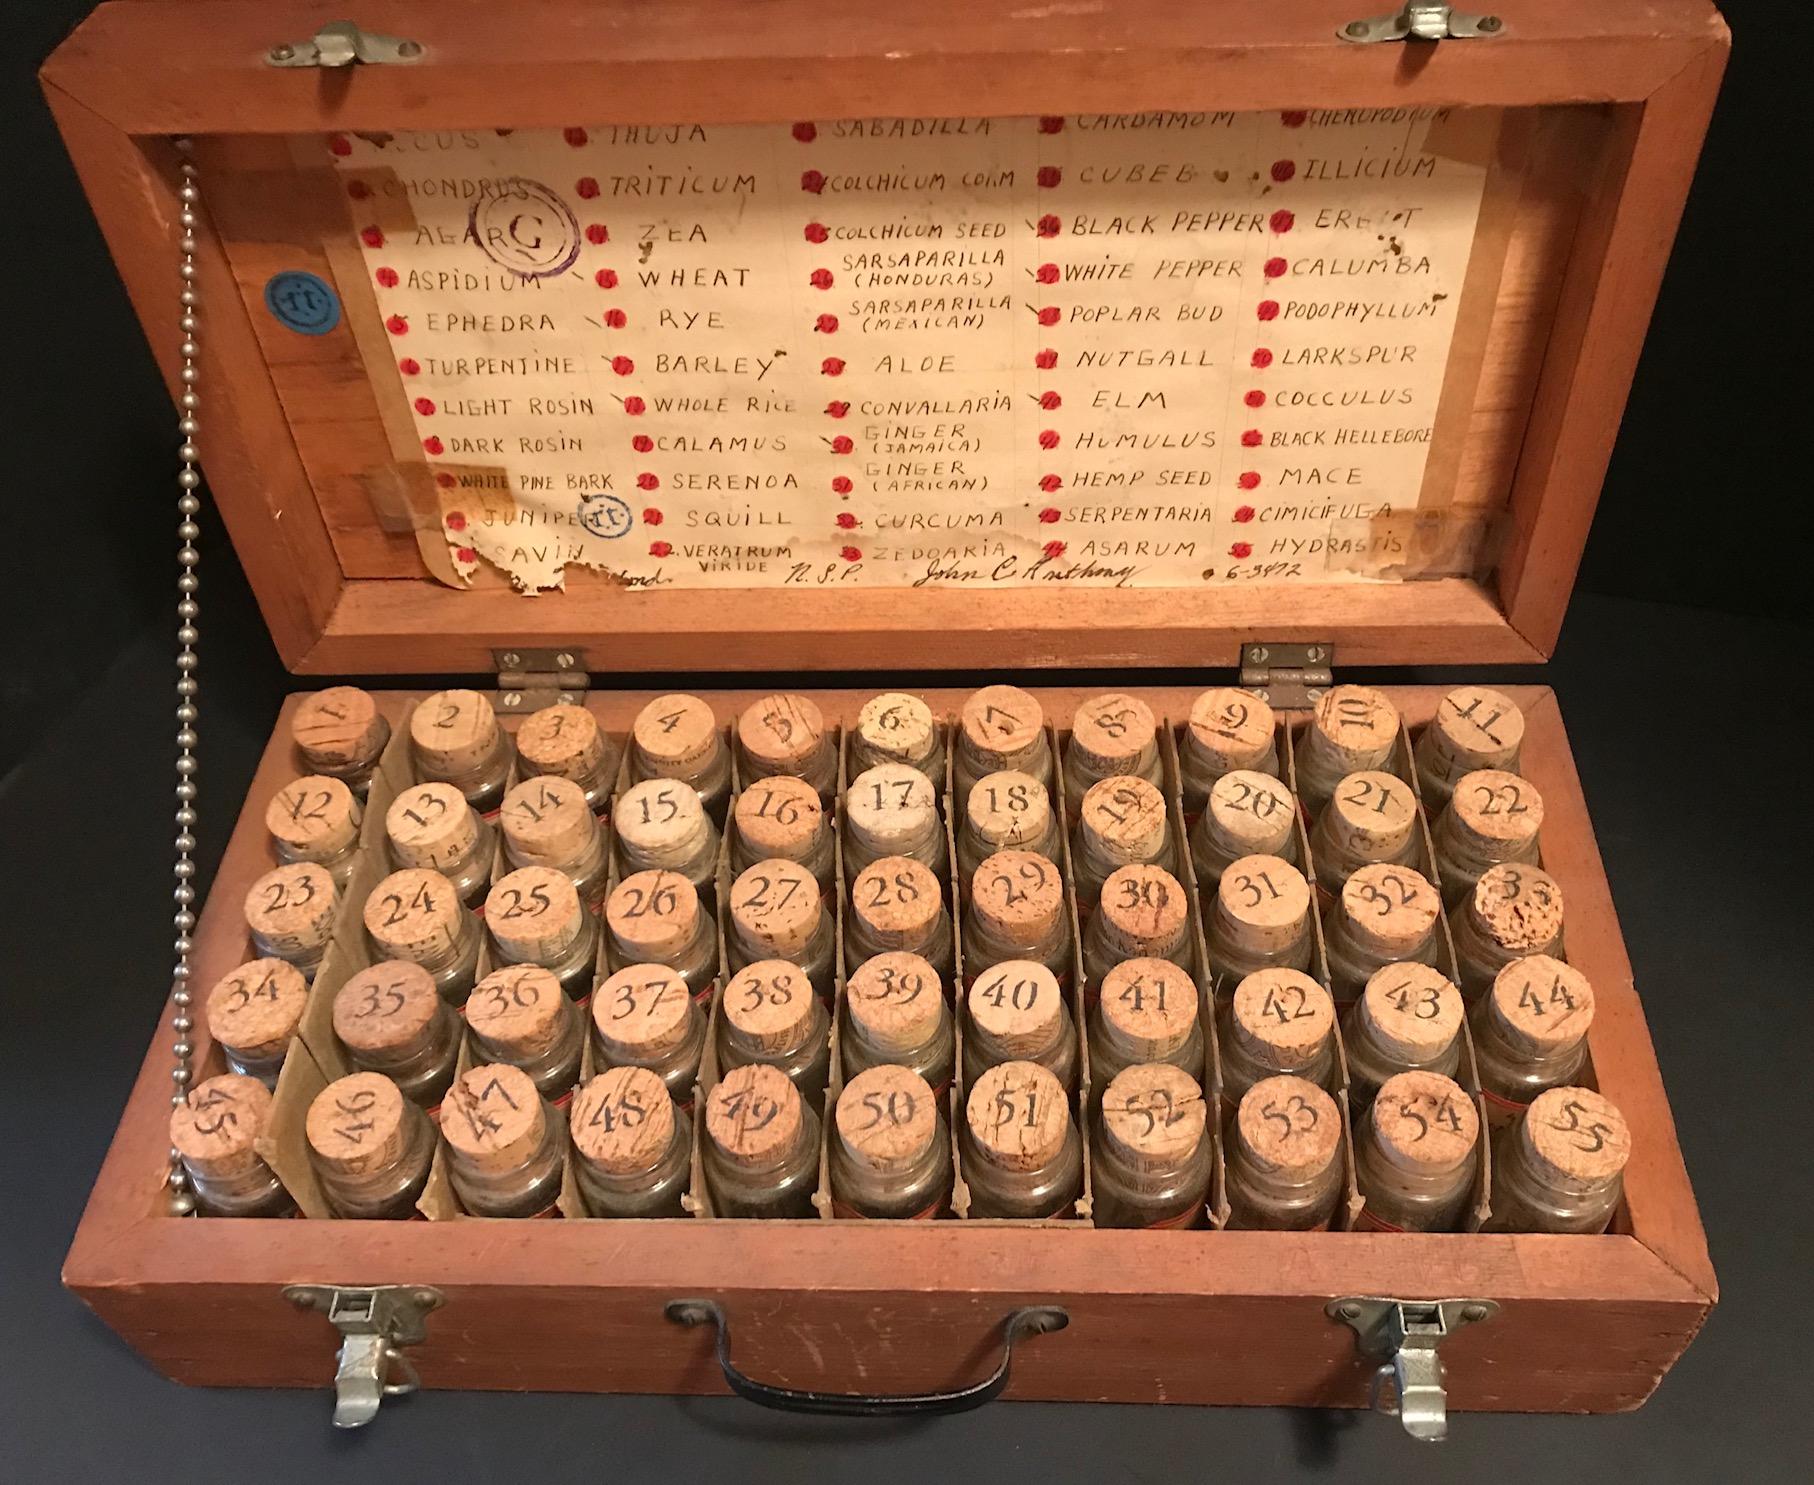 This box houses 55 vials of nature’s essences and curiosities.  Numerous herbs, seeds, grains, roots, spices and the like are collected here.  Names and numbers are hand written on the original paper labels of each vial and also catalogued under the